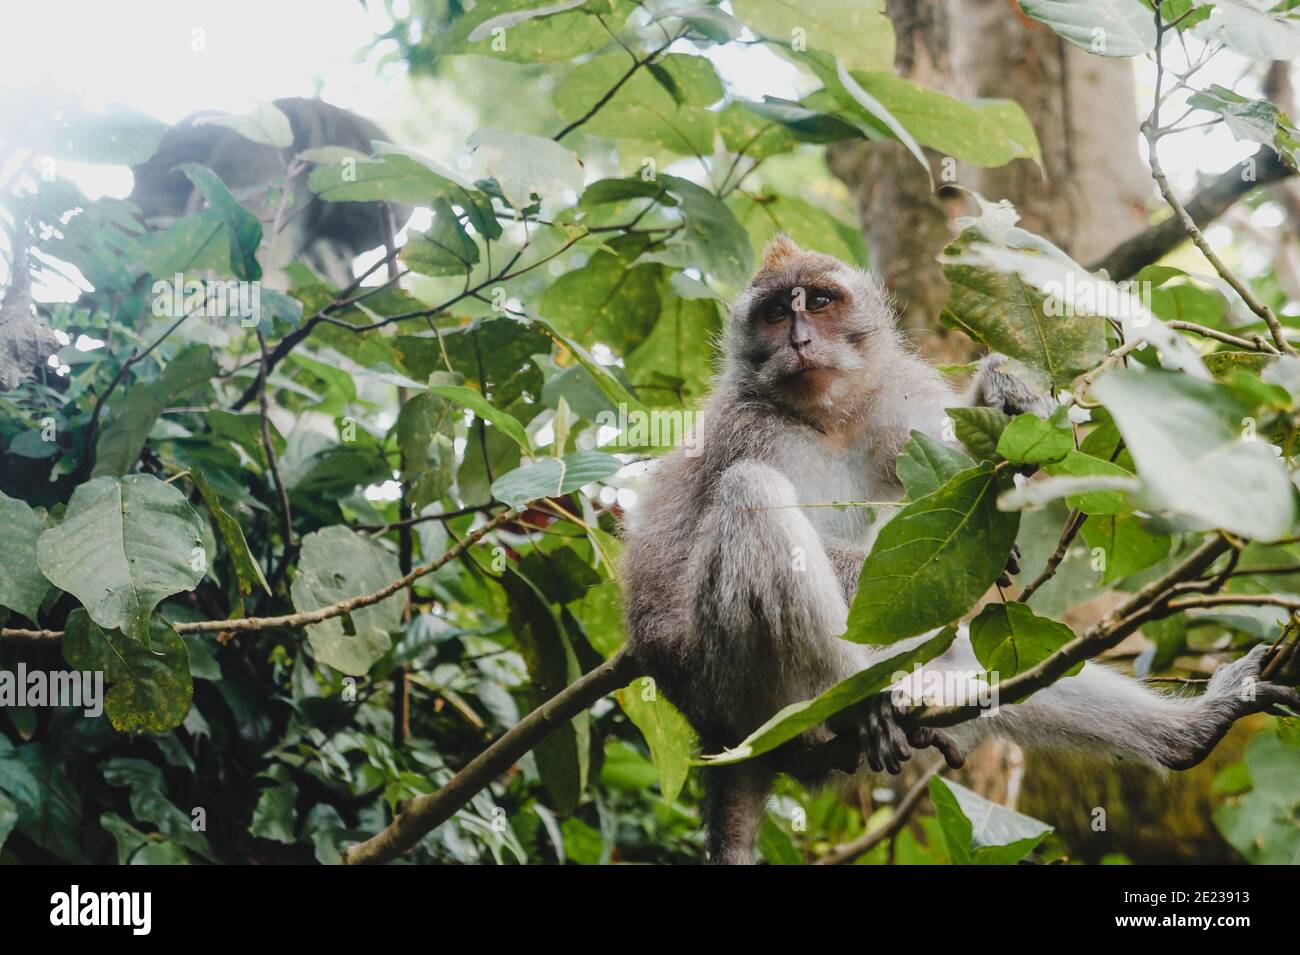 Monkeys in the wild jungle of Indonesia. Stock Photo